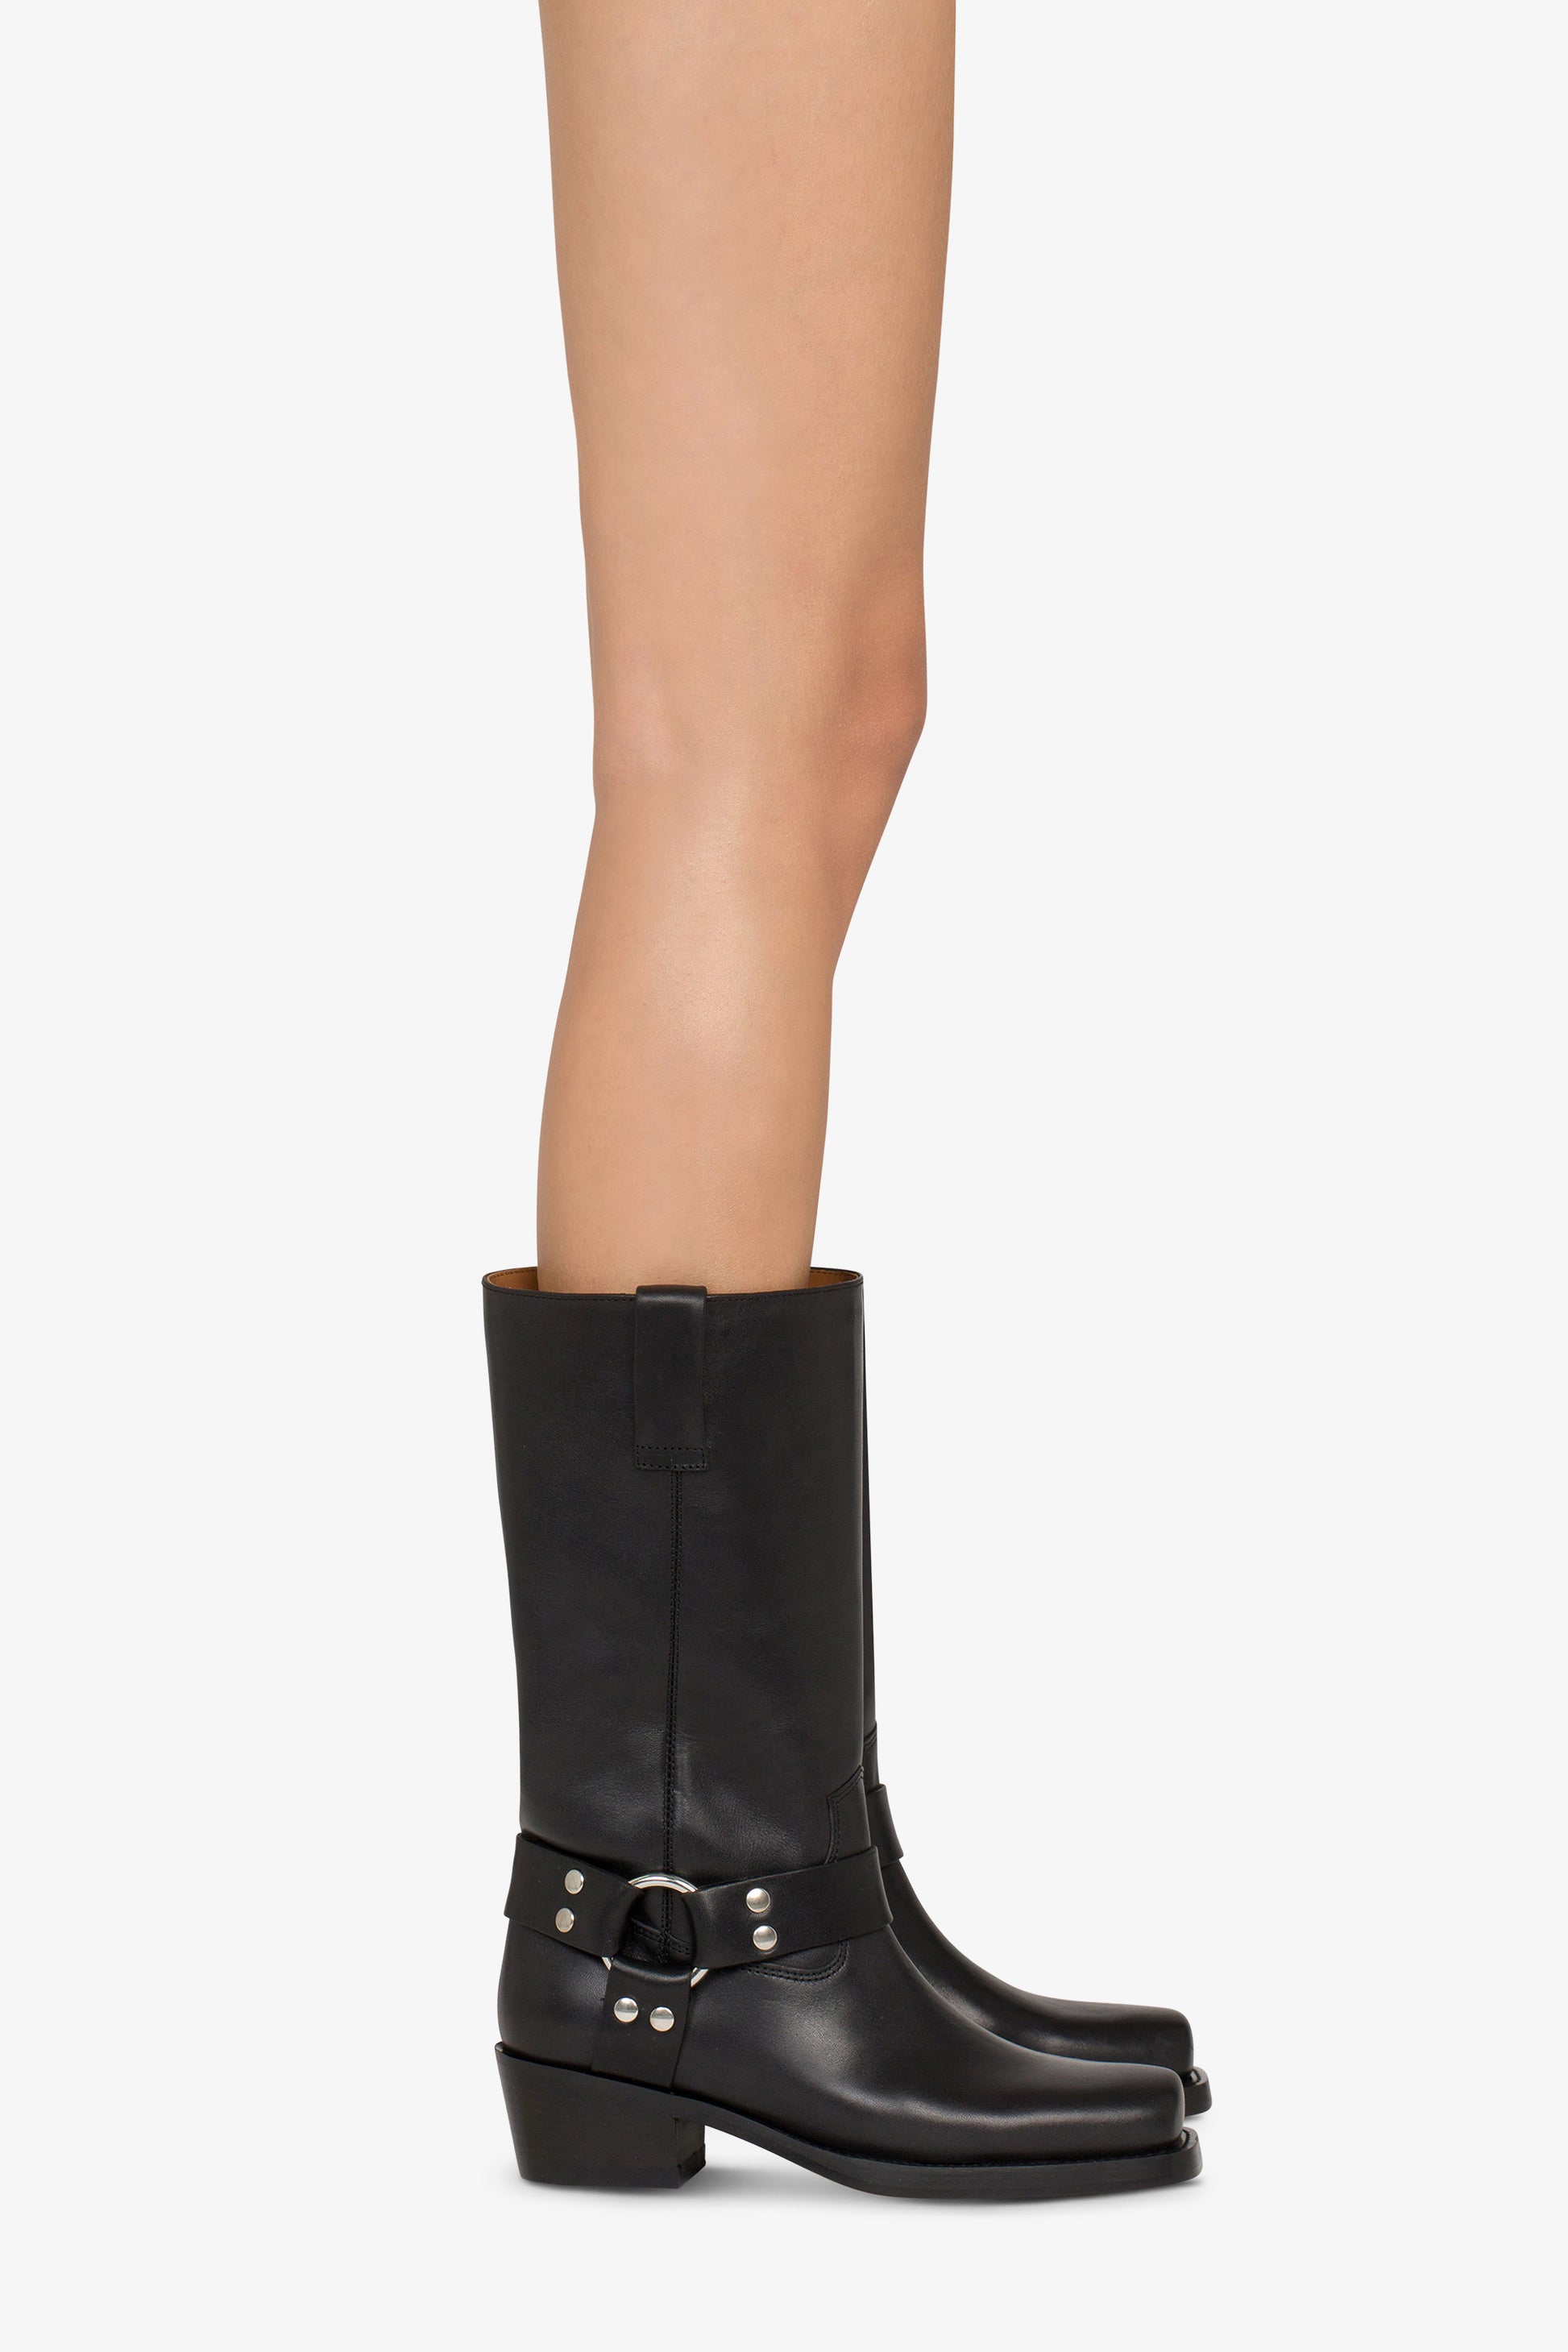 Square-toe boots in smooth black leather - Produkt getragen